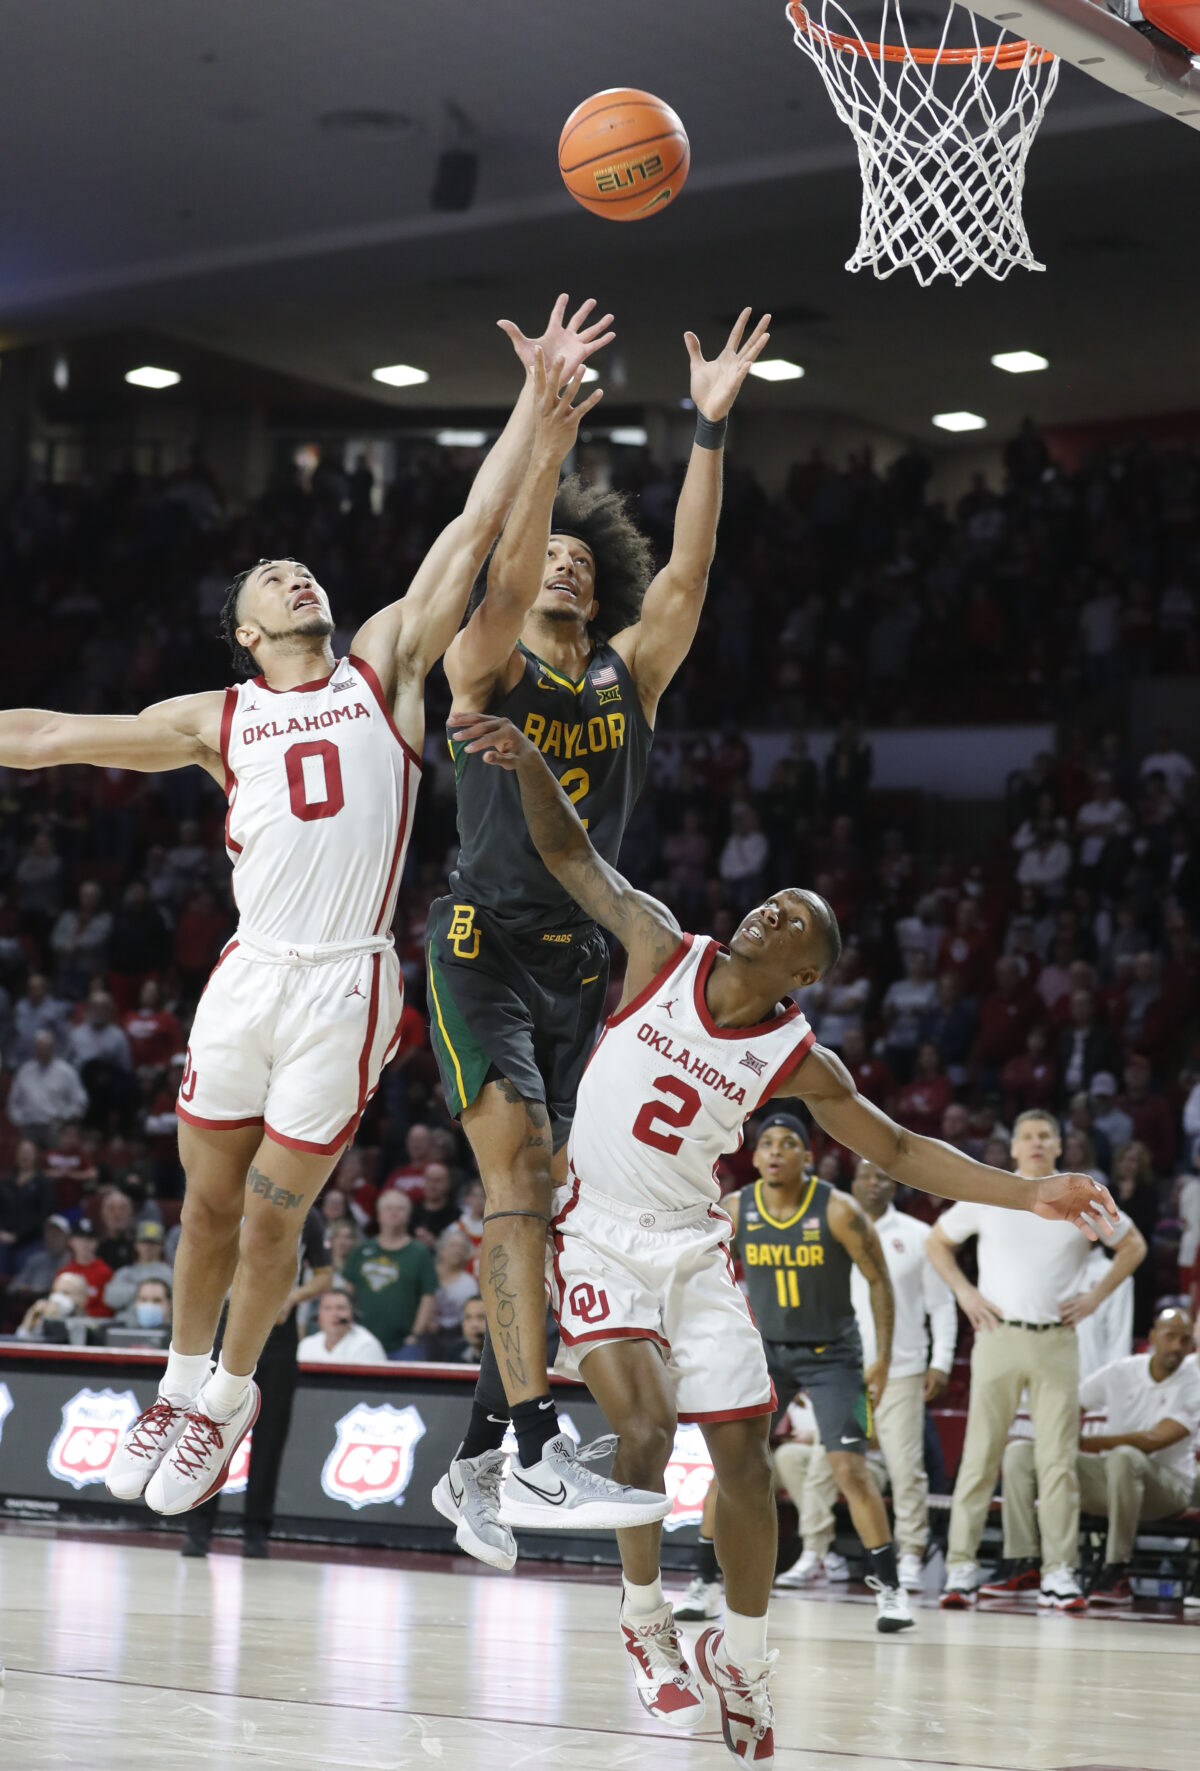 How to watch Oklahoma men’s hoops in the Big 12 tournament against Baylor